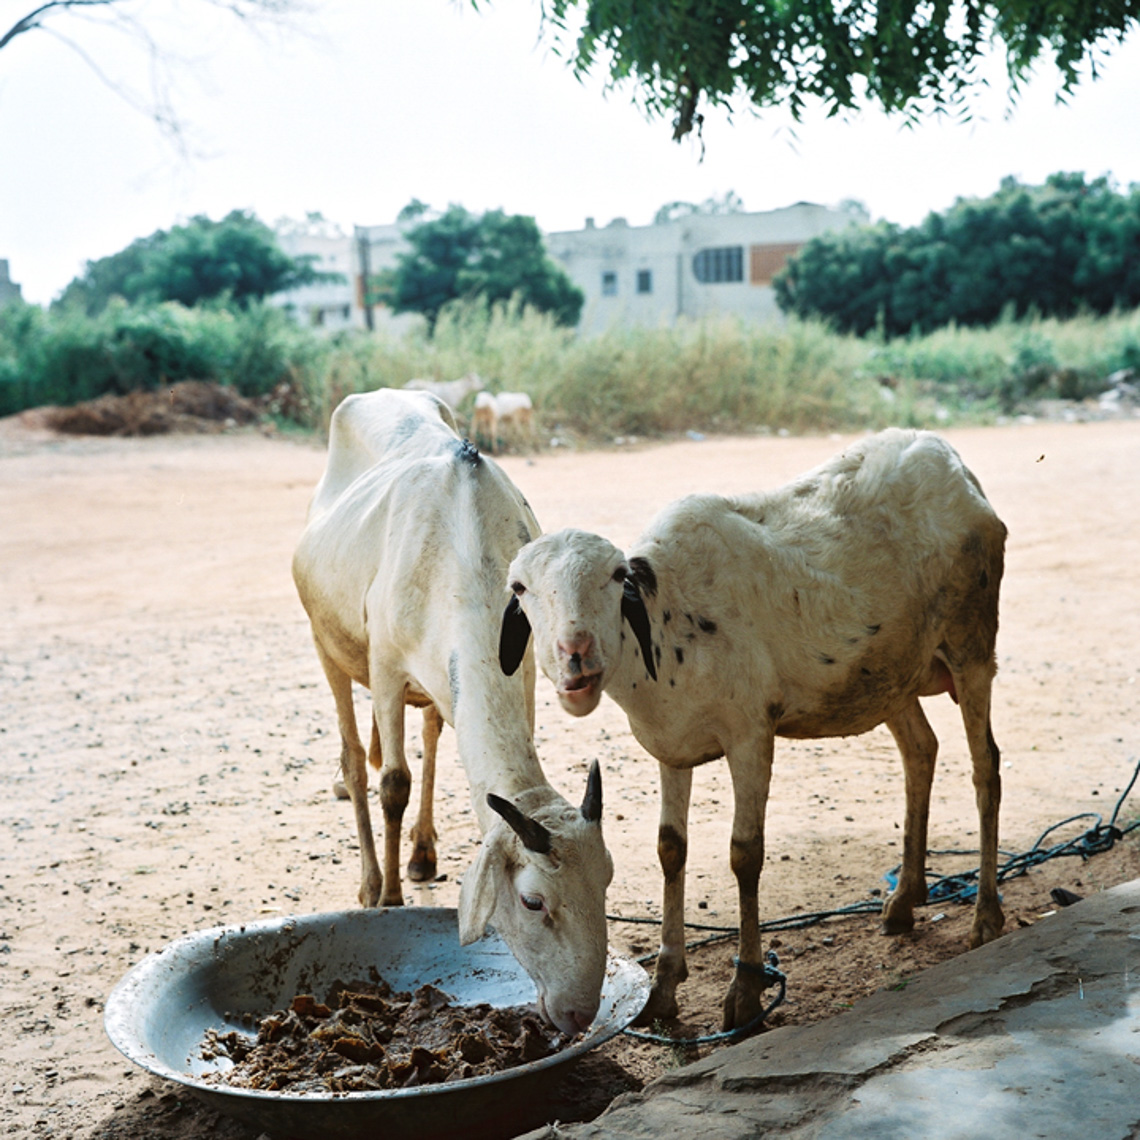 Goats - Thies West Africa